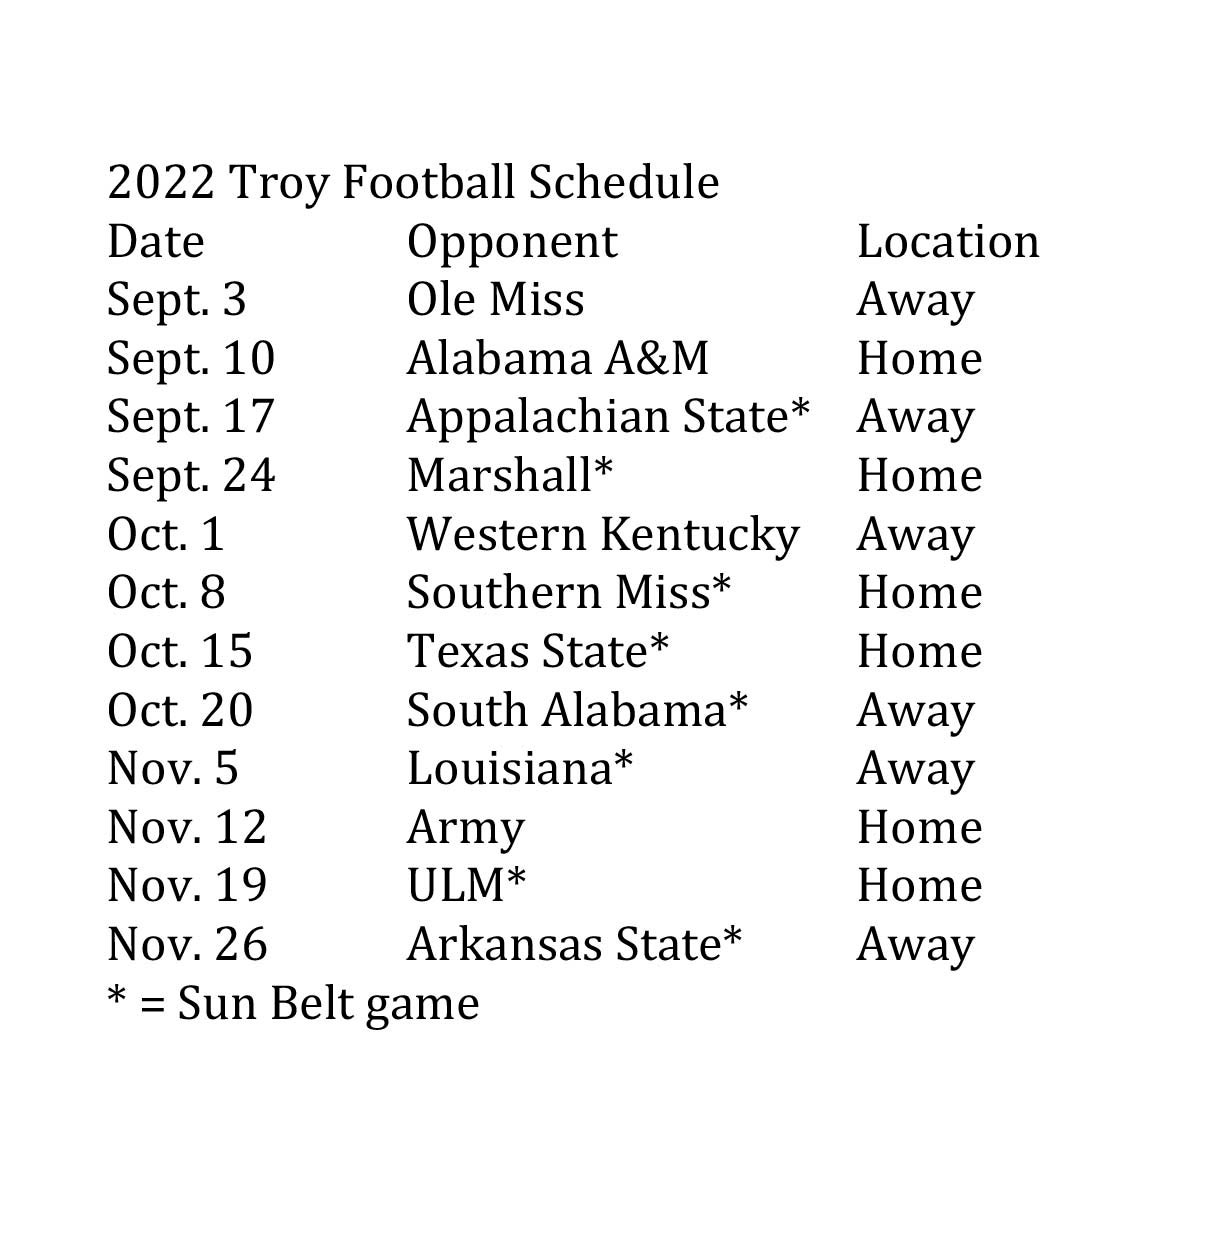 Troy releases 2022 football schedule - The Troy Messenger | The Troy